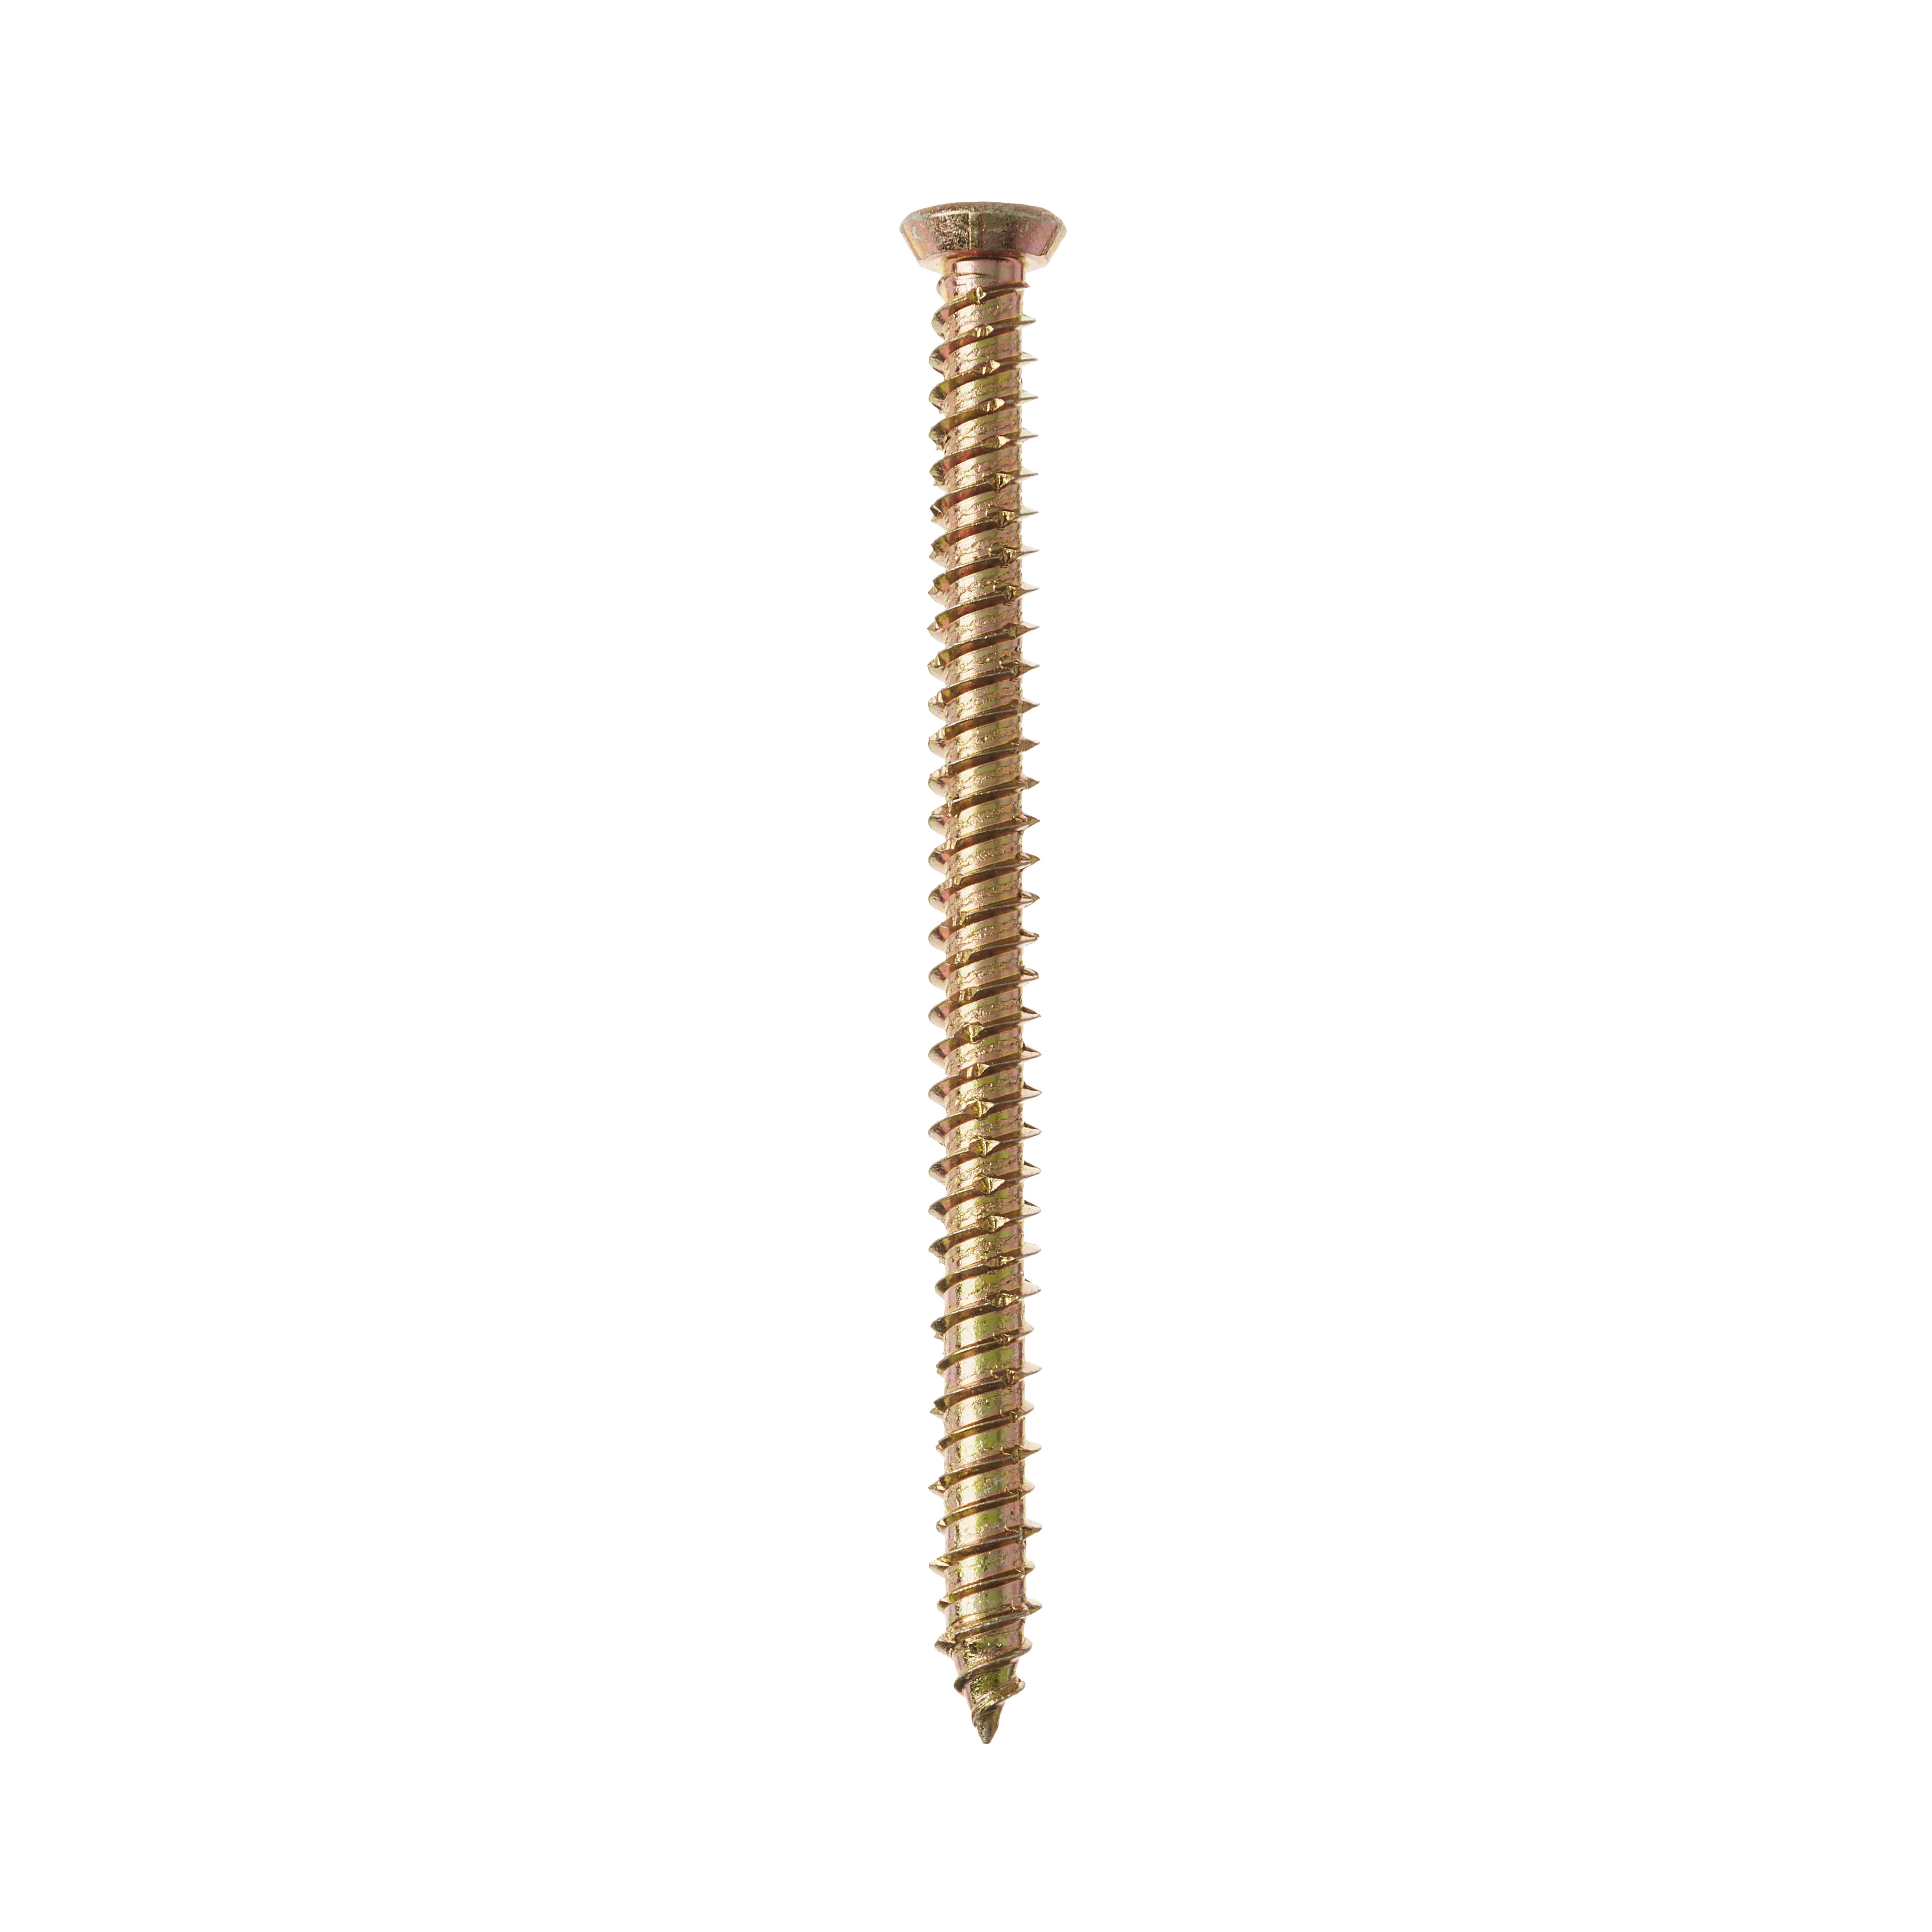 Easydrive TX Countersunk Zinc-plated Steel Screw (Dia)7.5mm (L)100mm, Pack of 100